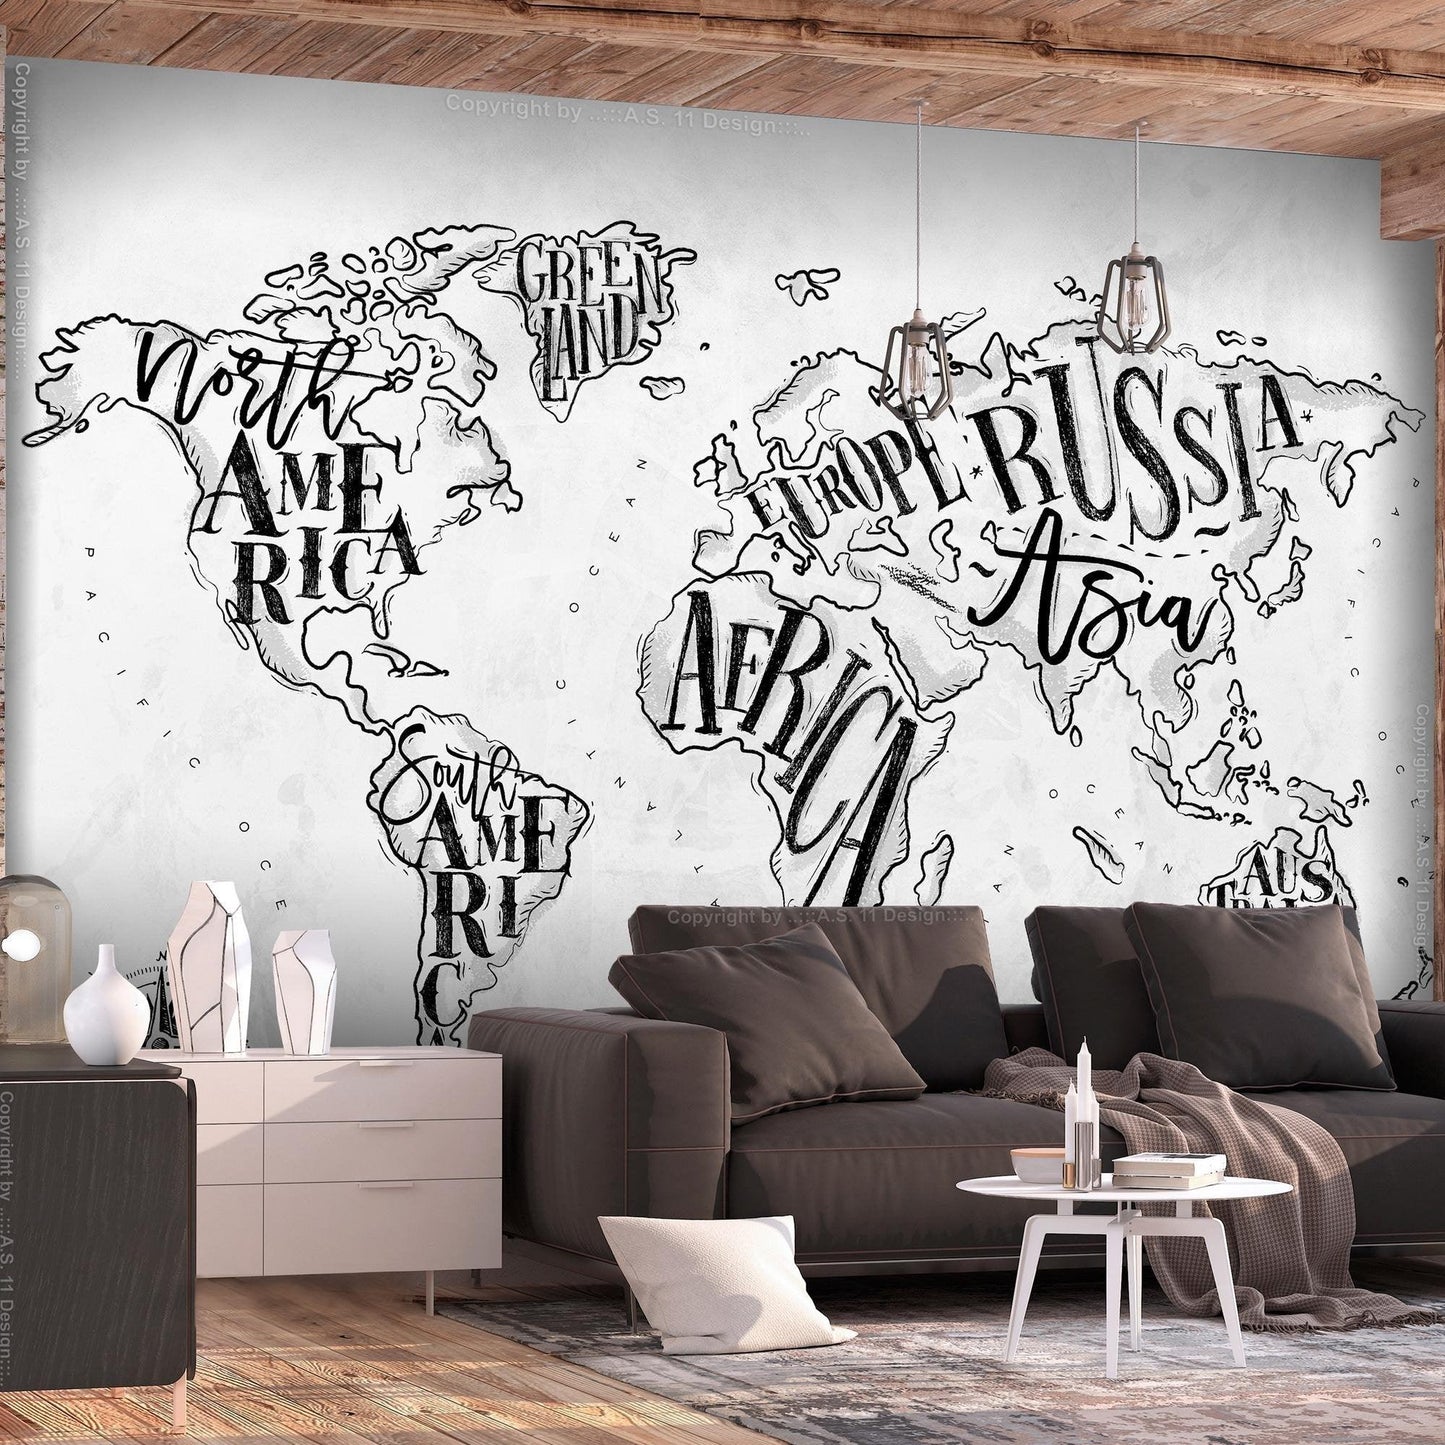 Peel and stick wall mural - Retro Continents (Grey) - www.trendingbestsellers.com